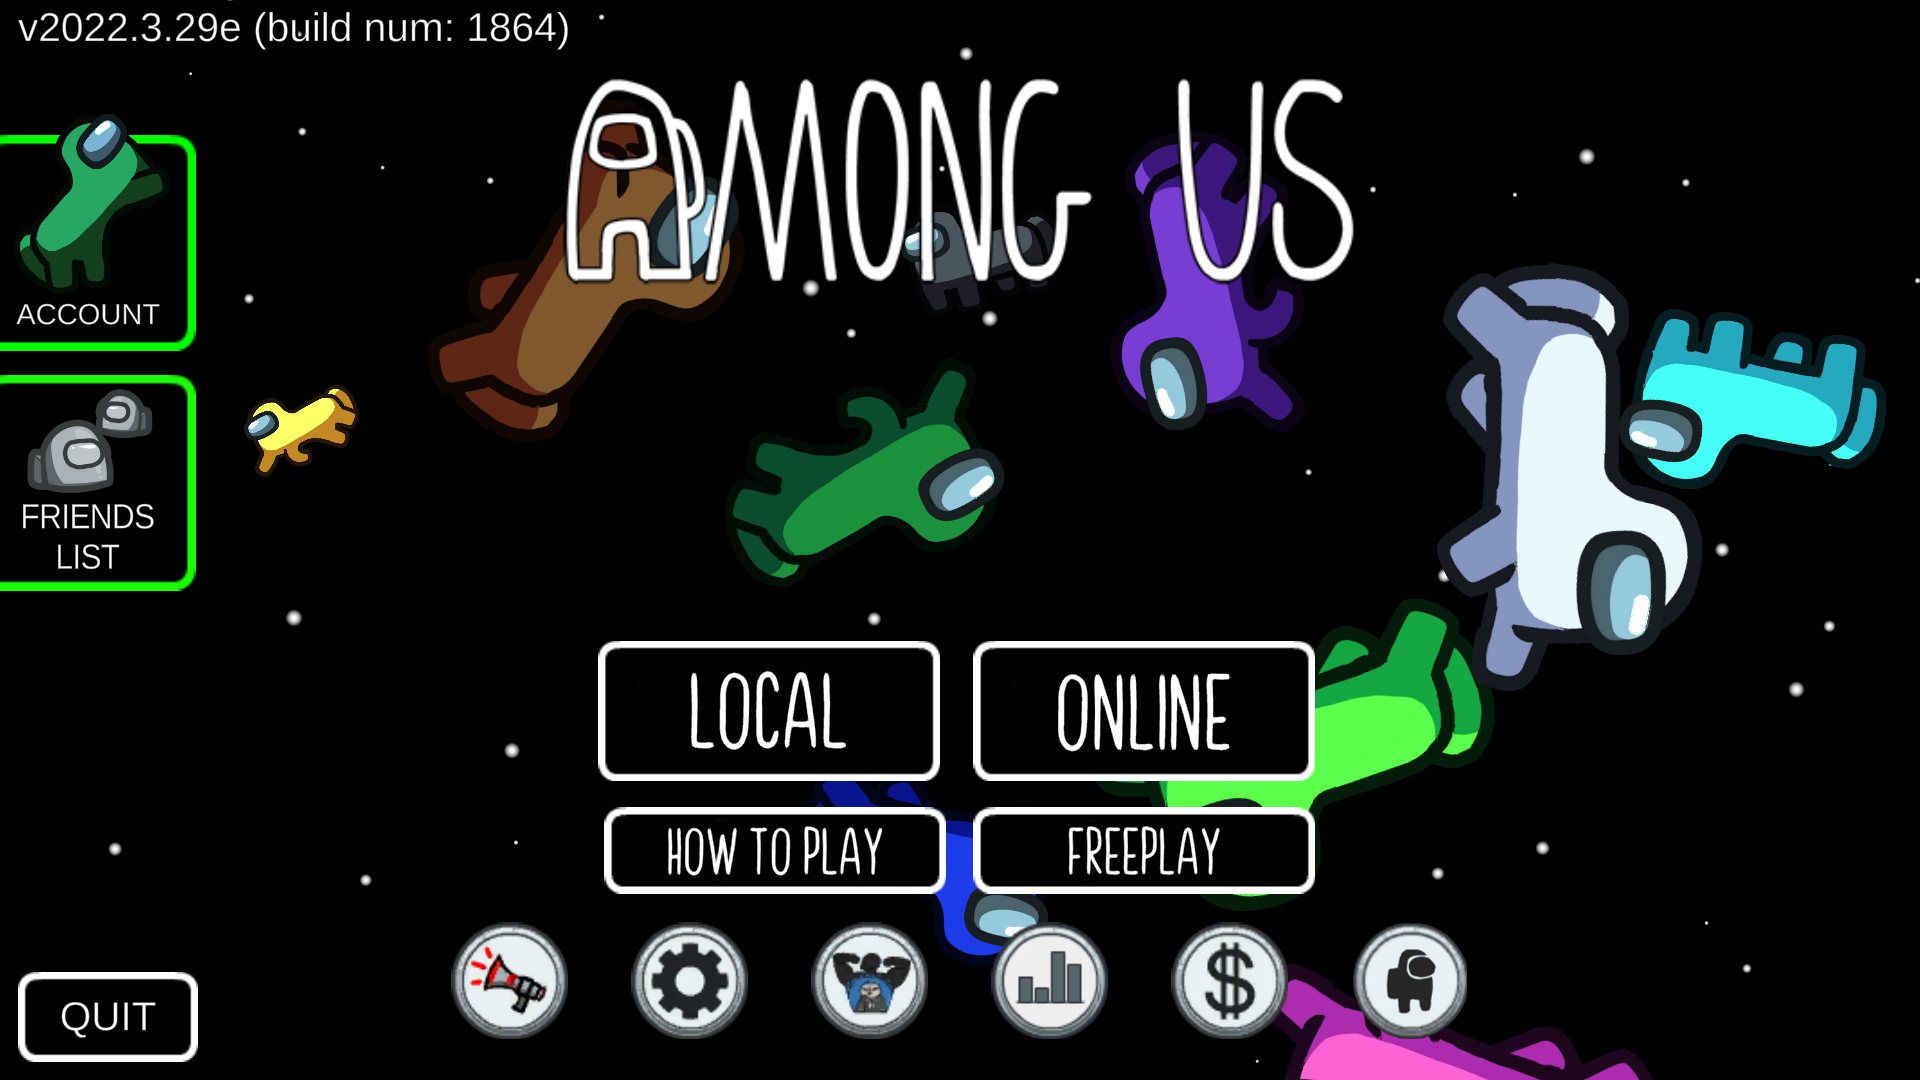 Among Us Horse Mode is a meme-turned-April Fools event